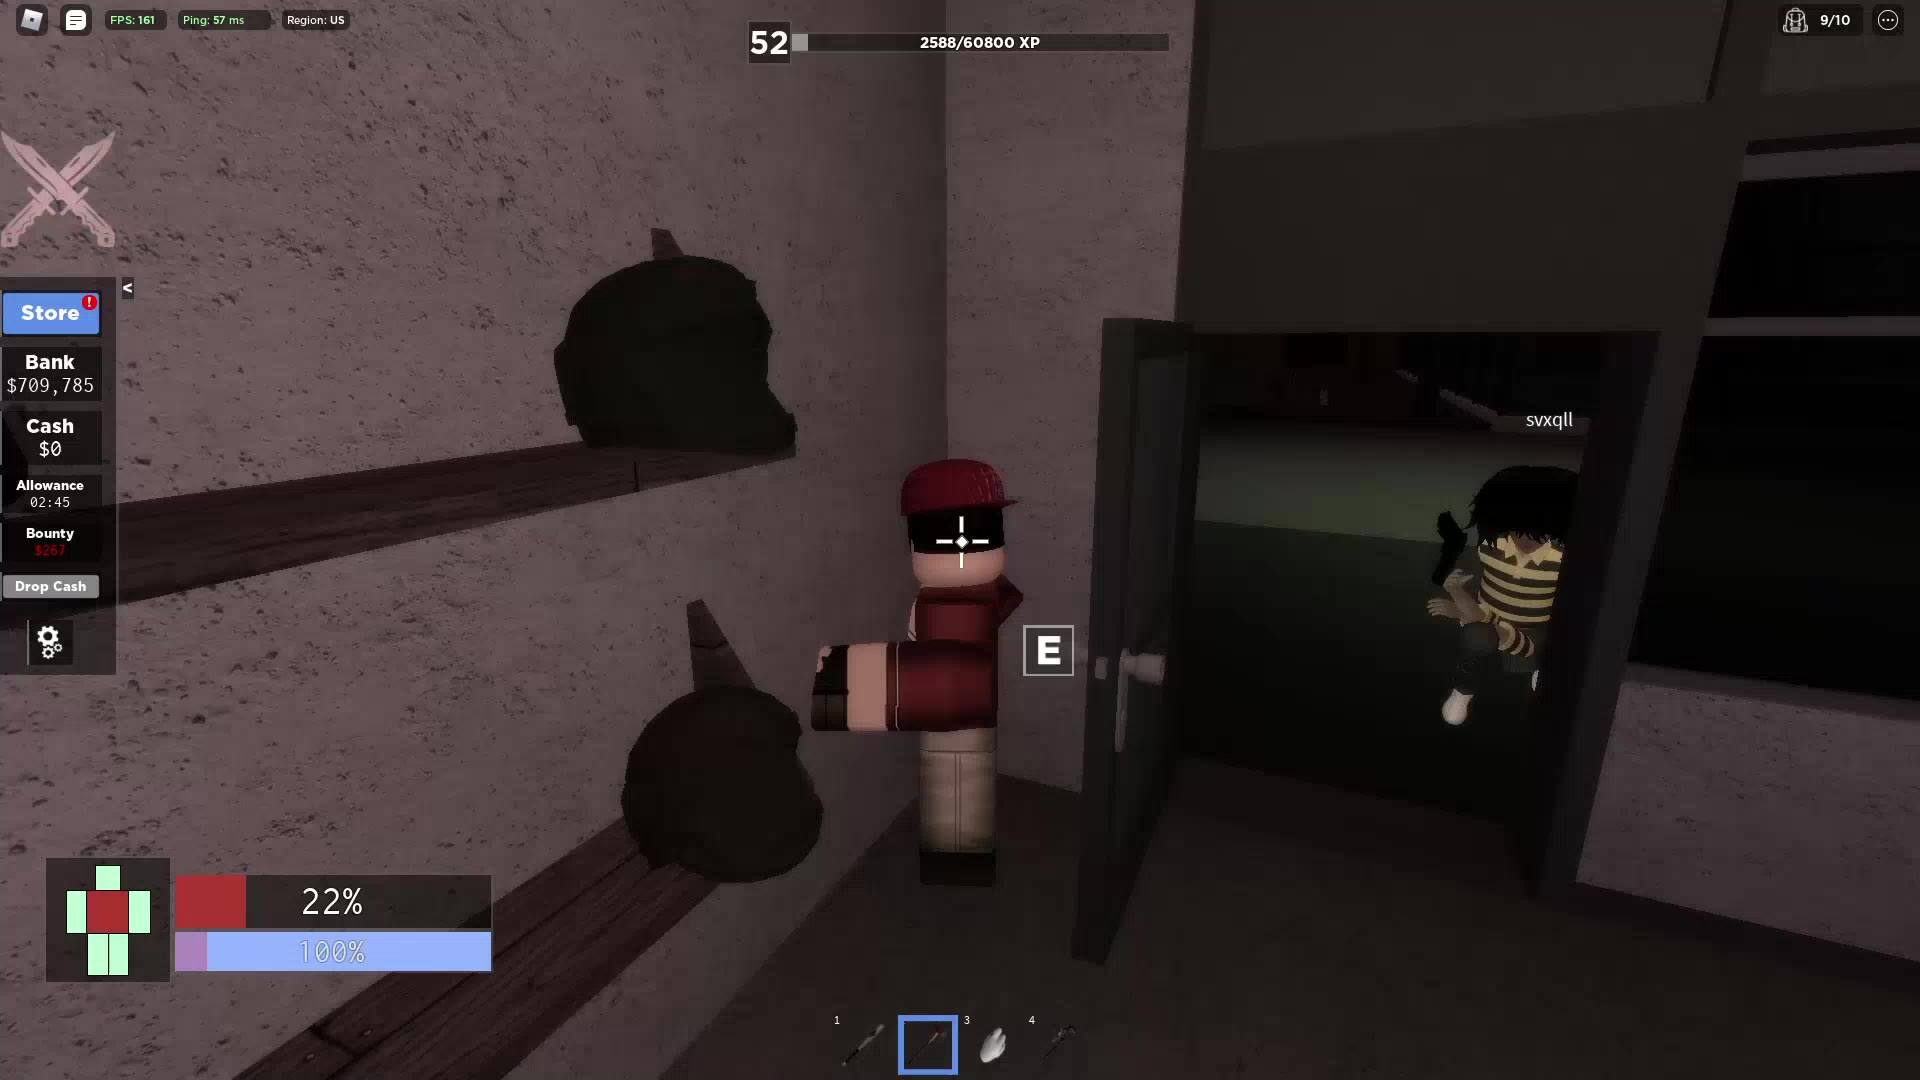 Fight Clips In Roblox Medal Tv - https://www.roblox.com/users/785/profile